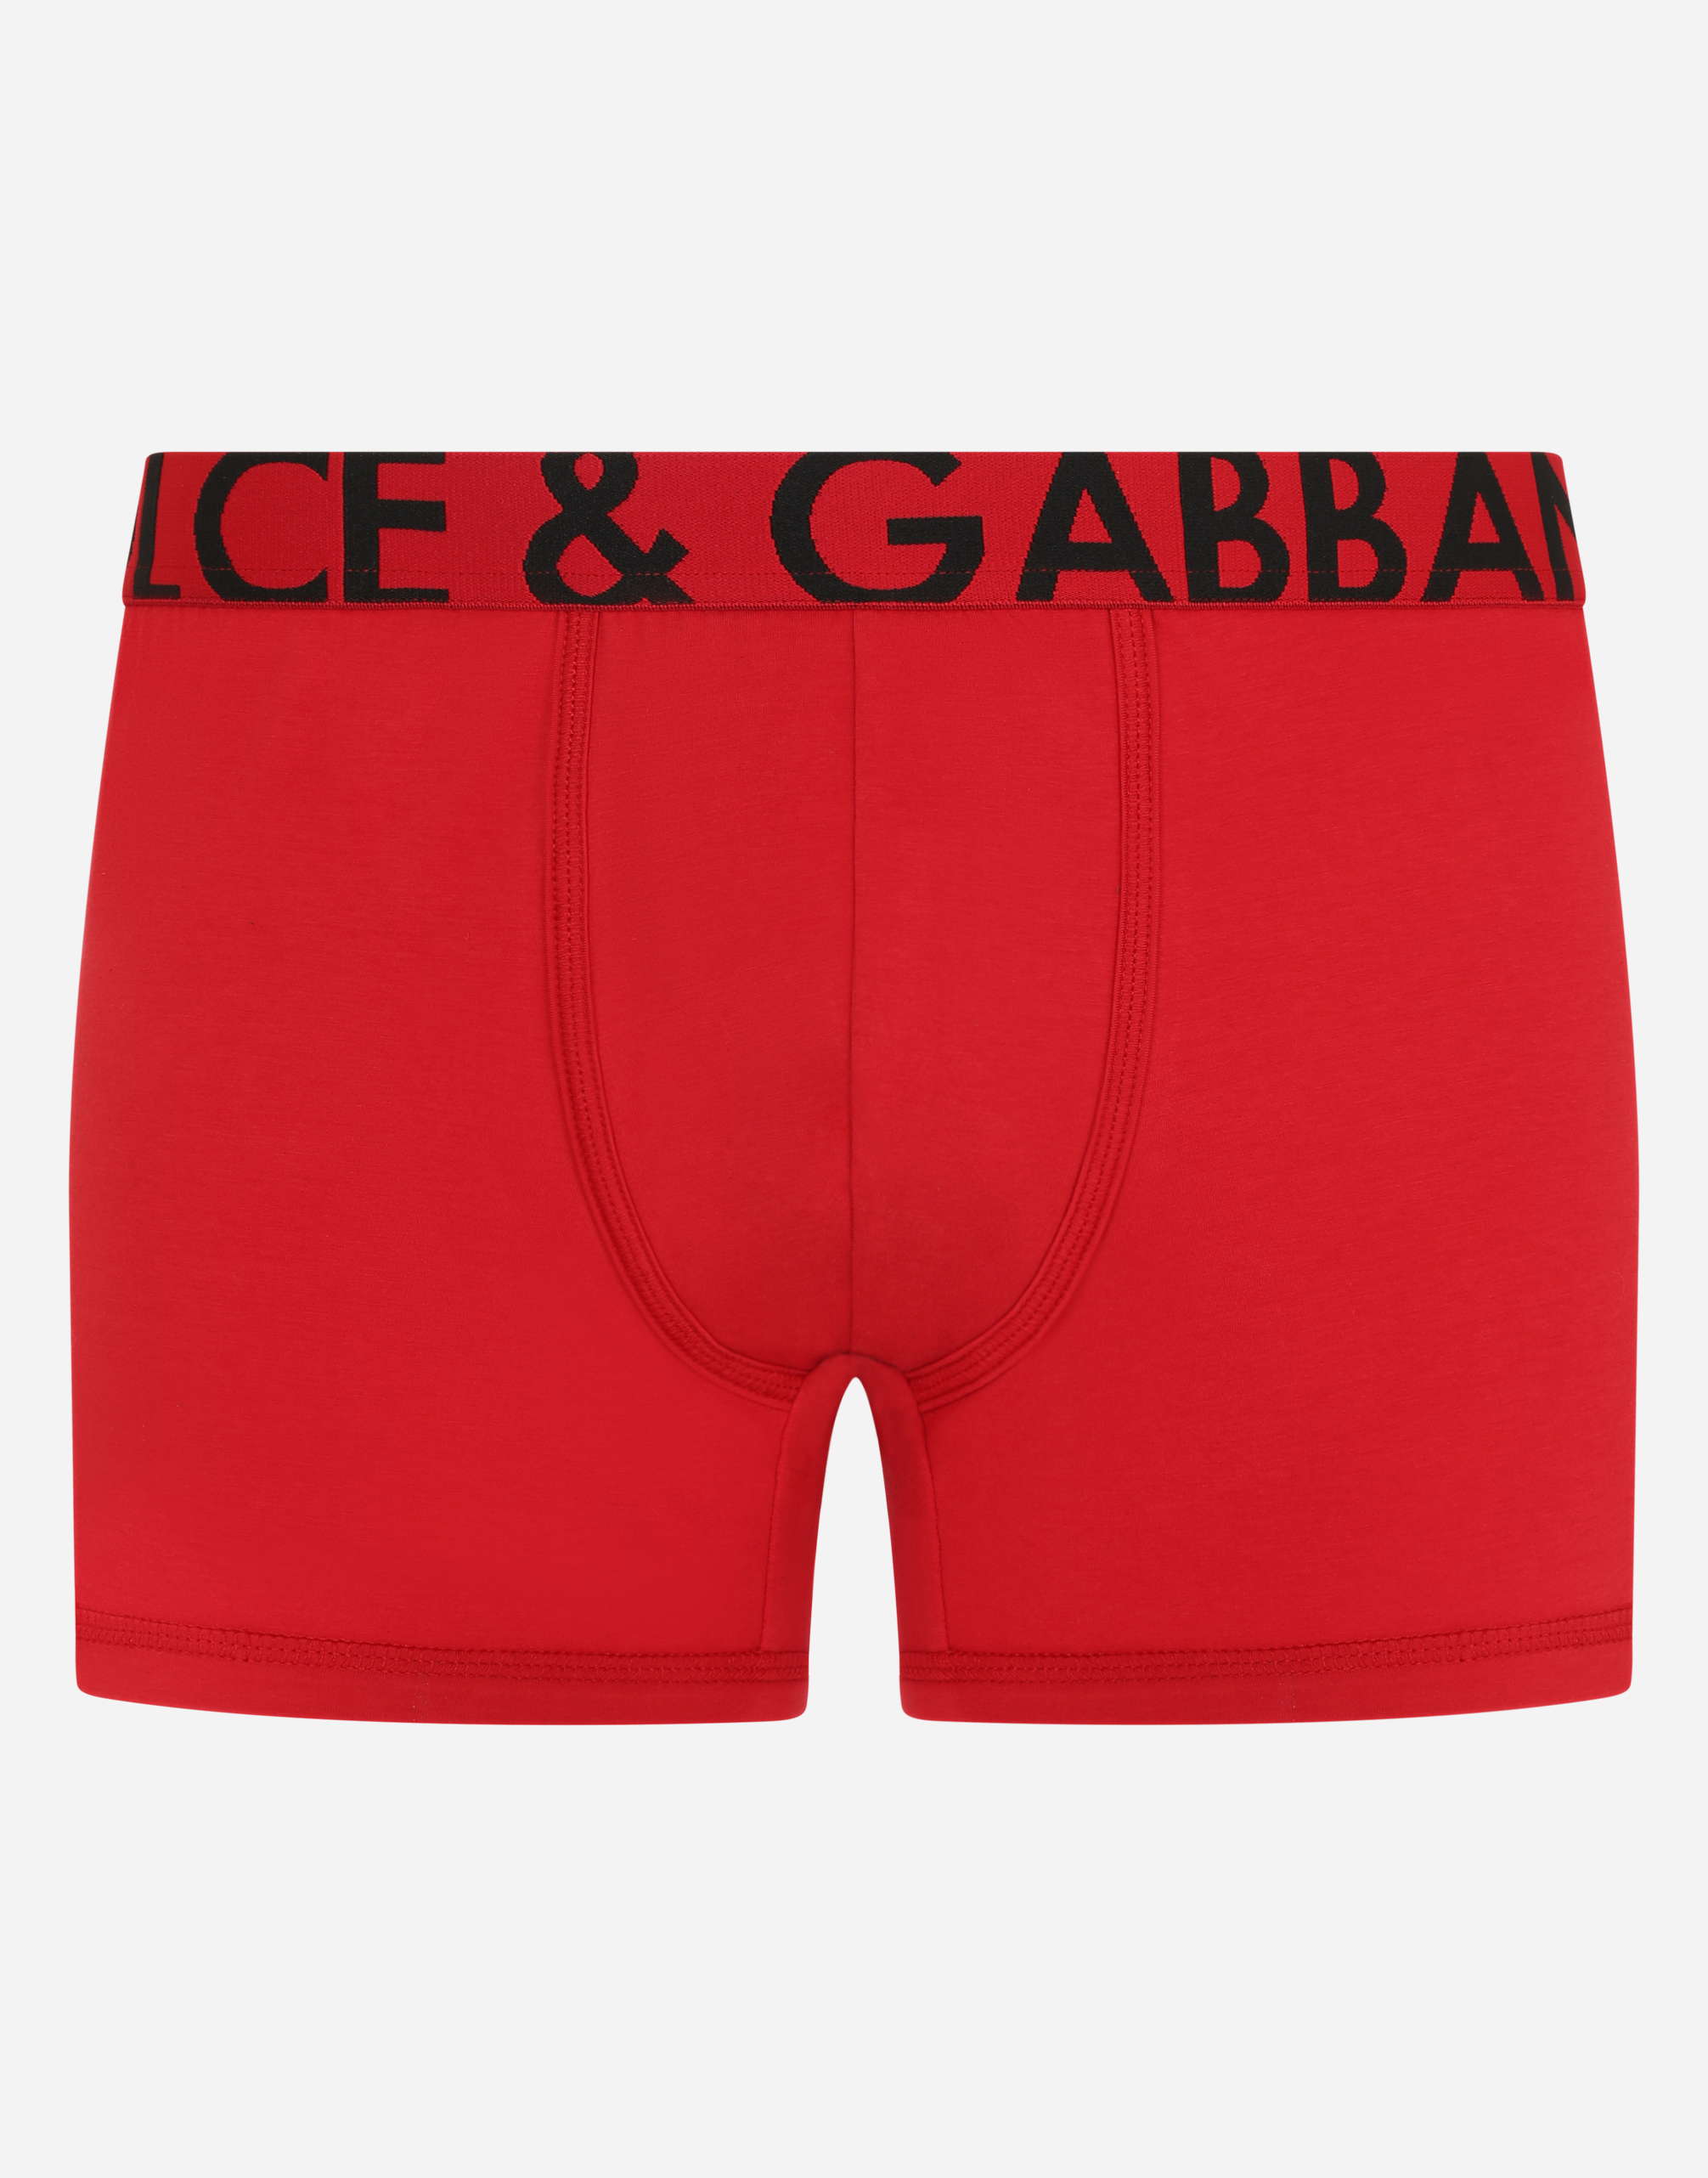 Two-way-stretch jersey boxers in Bordeaux